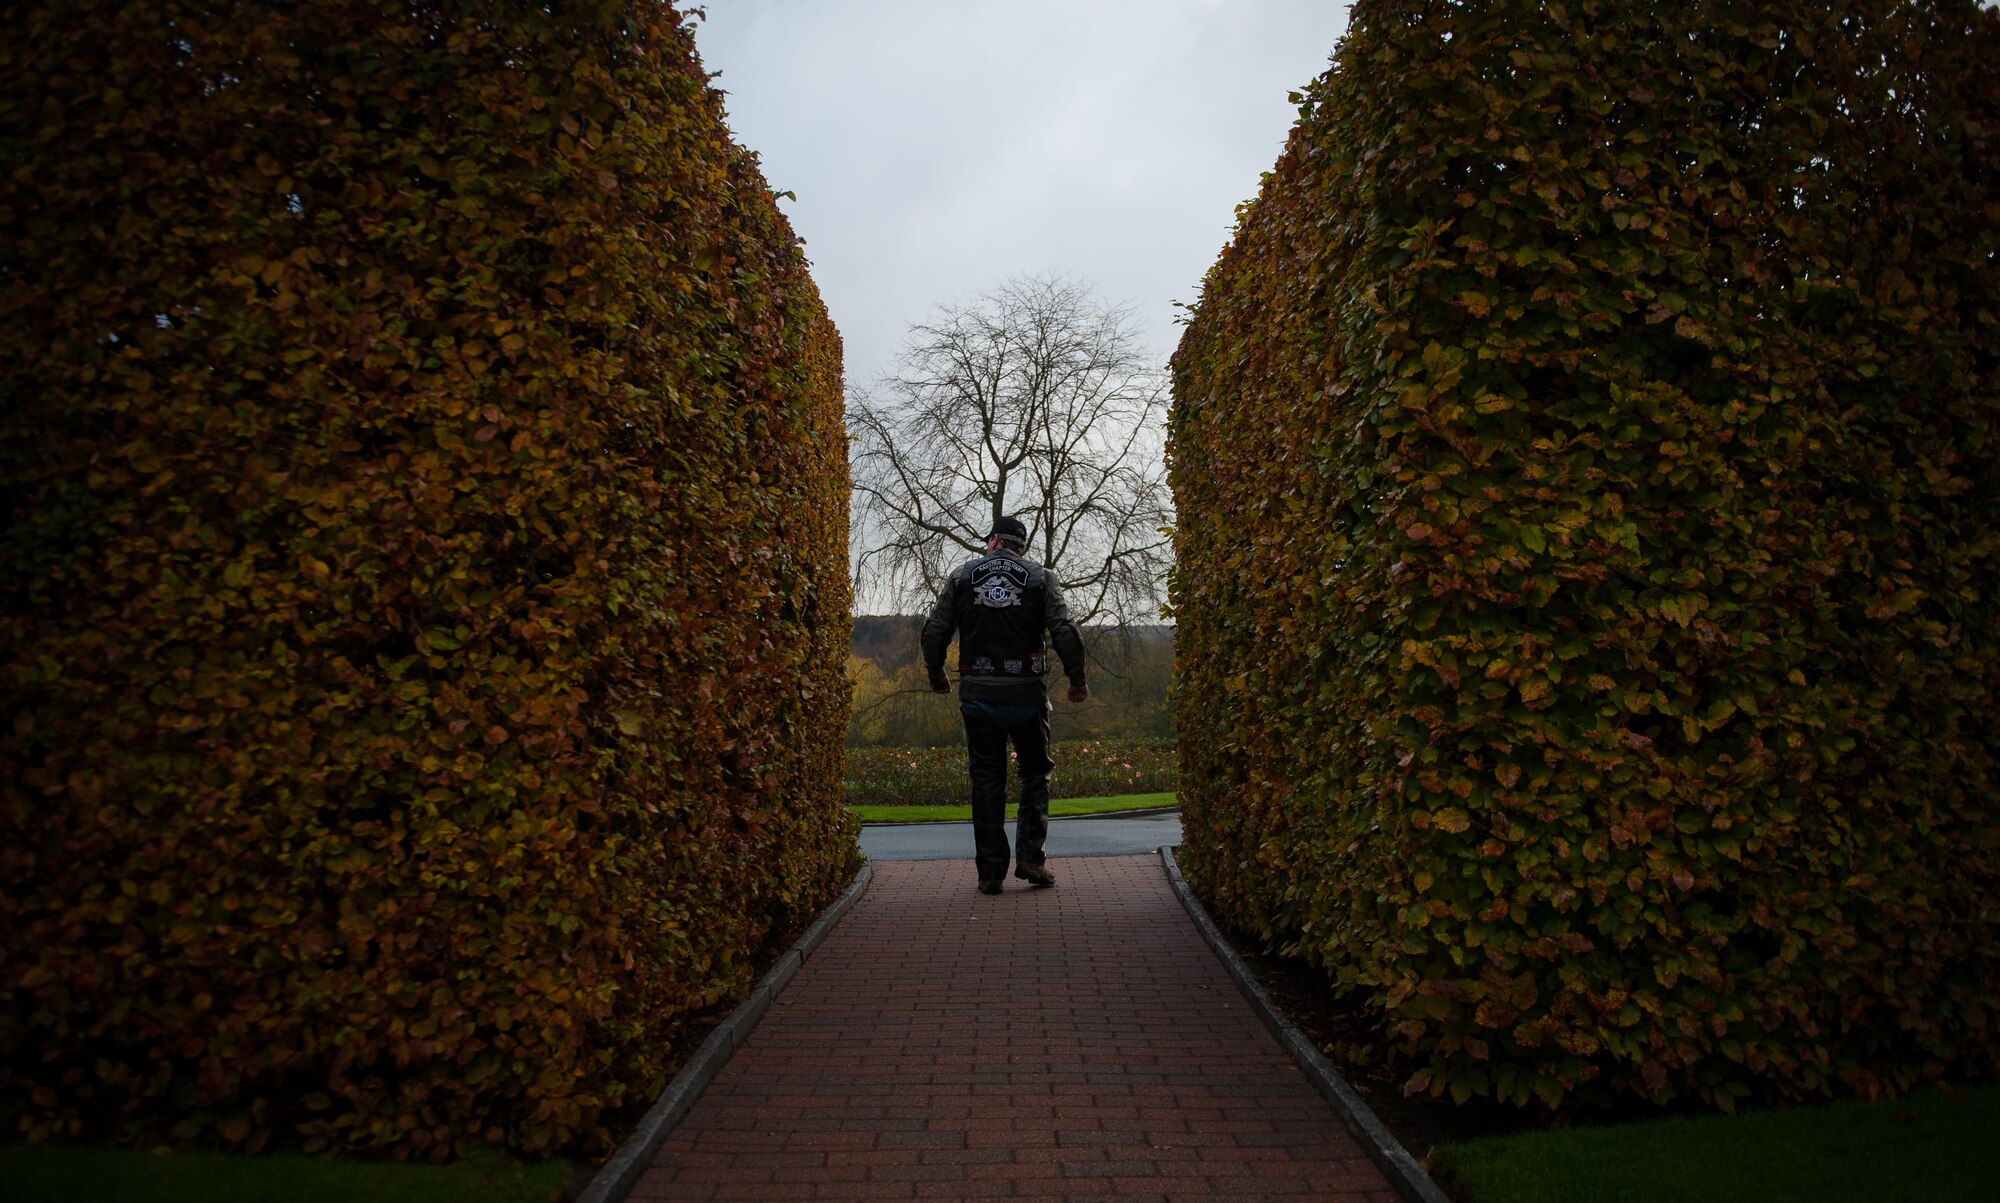 A member of the Ramstein military motorcycle club from the Kaiserslautern Military Community walks through the entrance of the Lorraine American Cemetery Nov. 11, 2016, at St. Avold, France. Veterans Day is observed annually on November 11 and commemorates military veterans who currently serve or have served the U.S. armed forces, including those who gave the ultimate sacrifice. According to the DoD and Veterans Administration, since World War I, approximately 624,000 U.S. servicemembers have been killed in action battling in wars and conflicts. The Lorraine American Cemetery contains the buried remains of over 10,000 of them. It is the largest burial site of U.S. servicemembers in Europe. (U.S. Air Force photo by Airman 1st Class Lane T. Plummer)